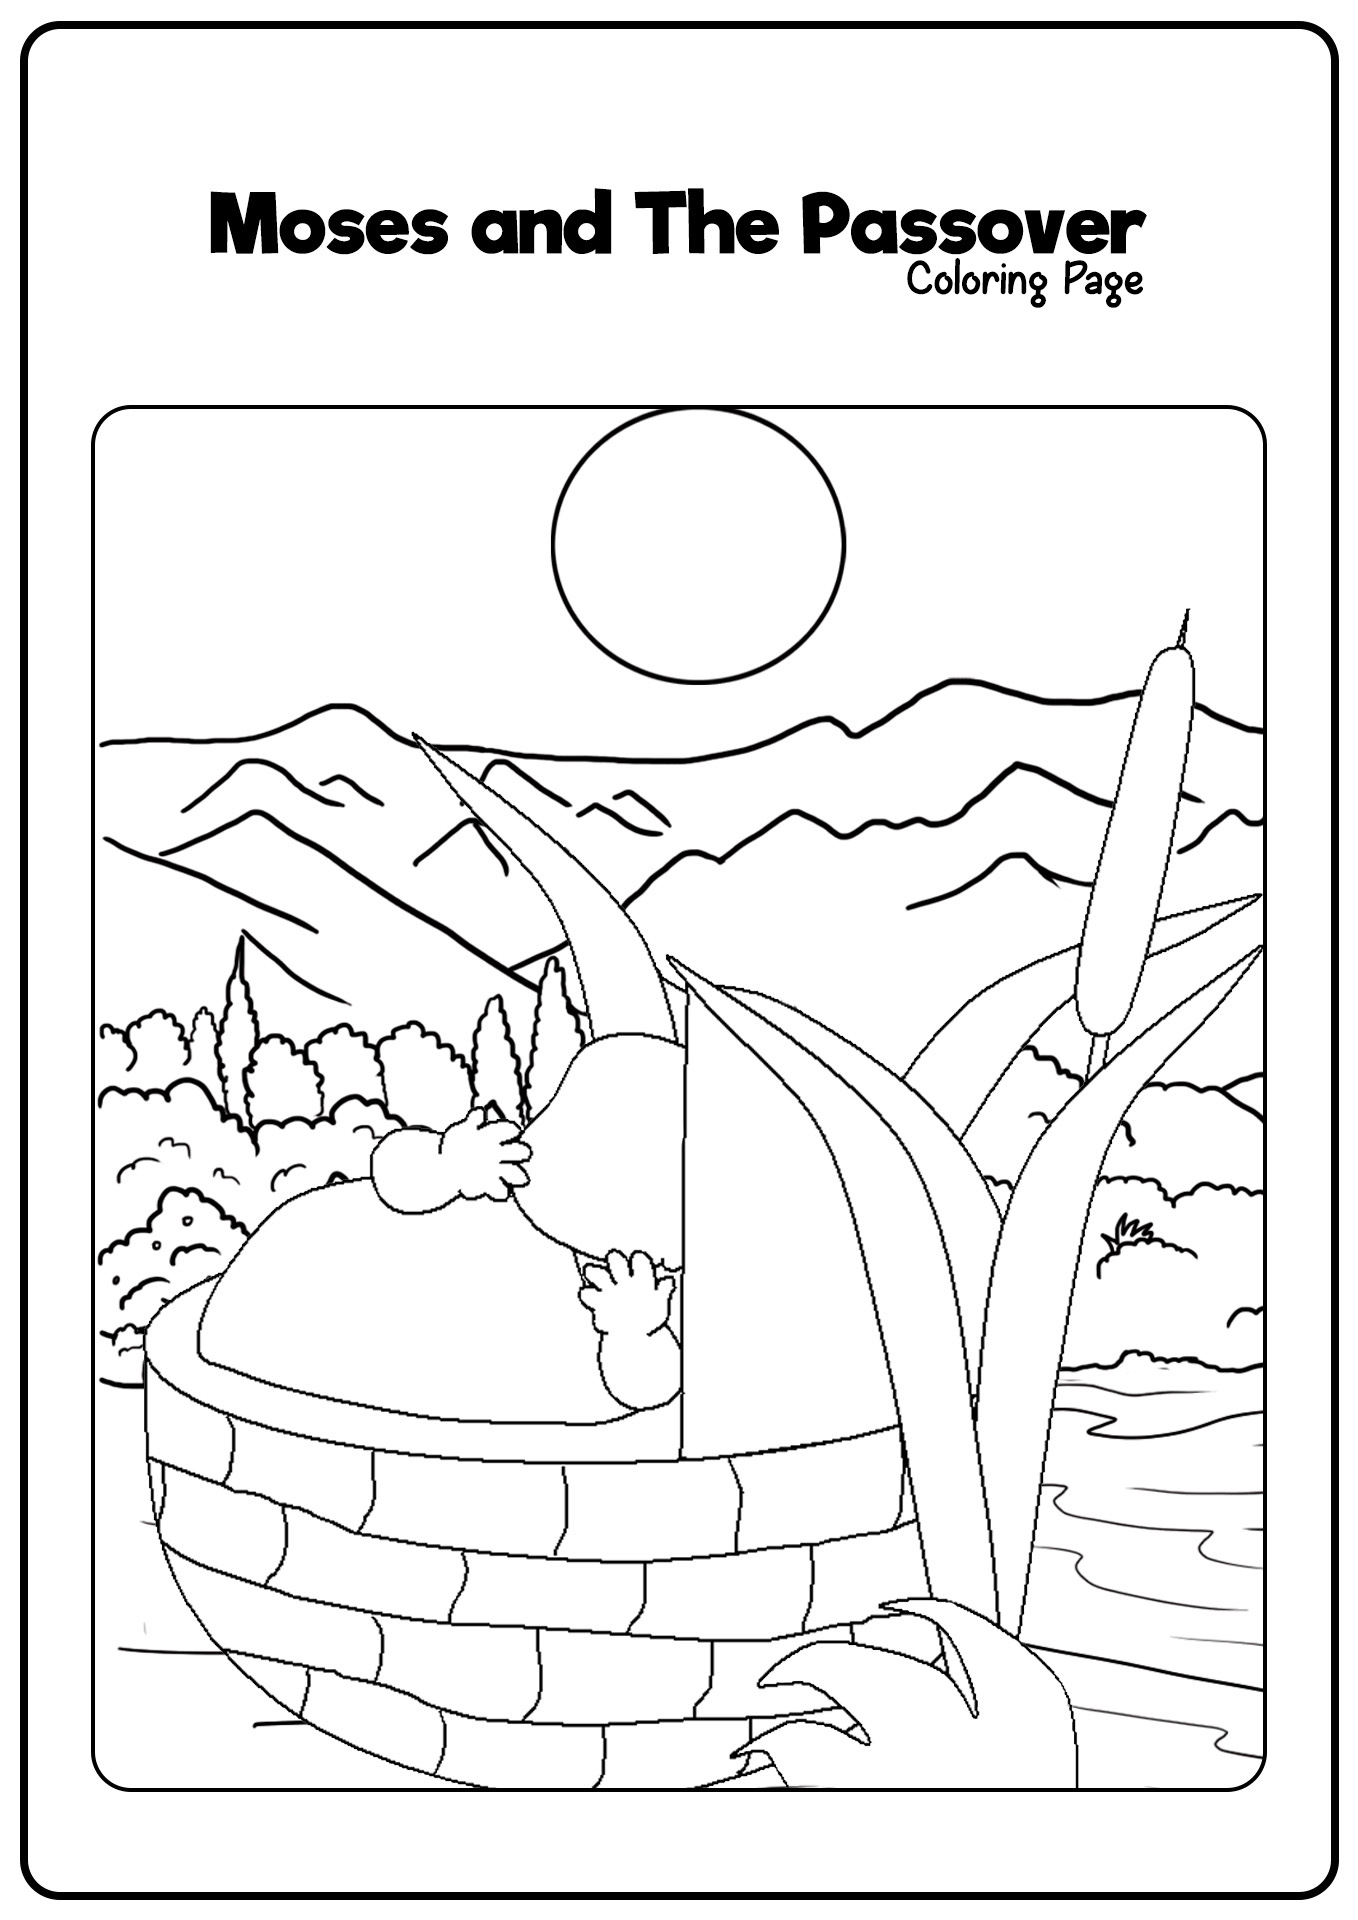 Moses and the Passover Coloring Pages